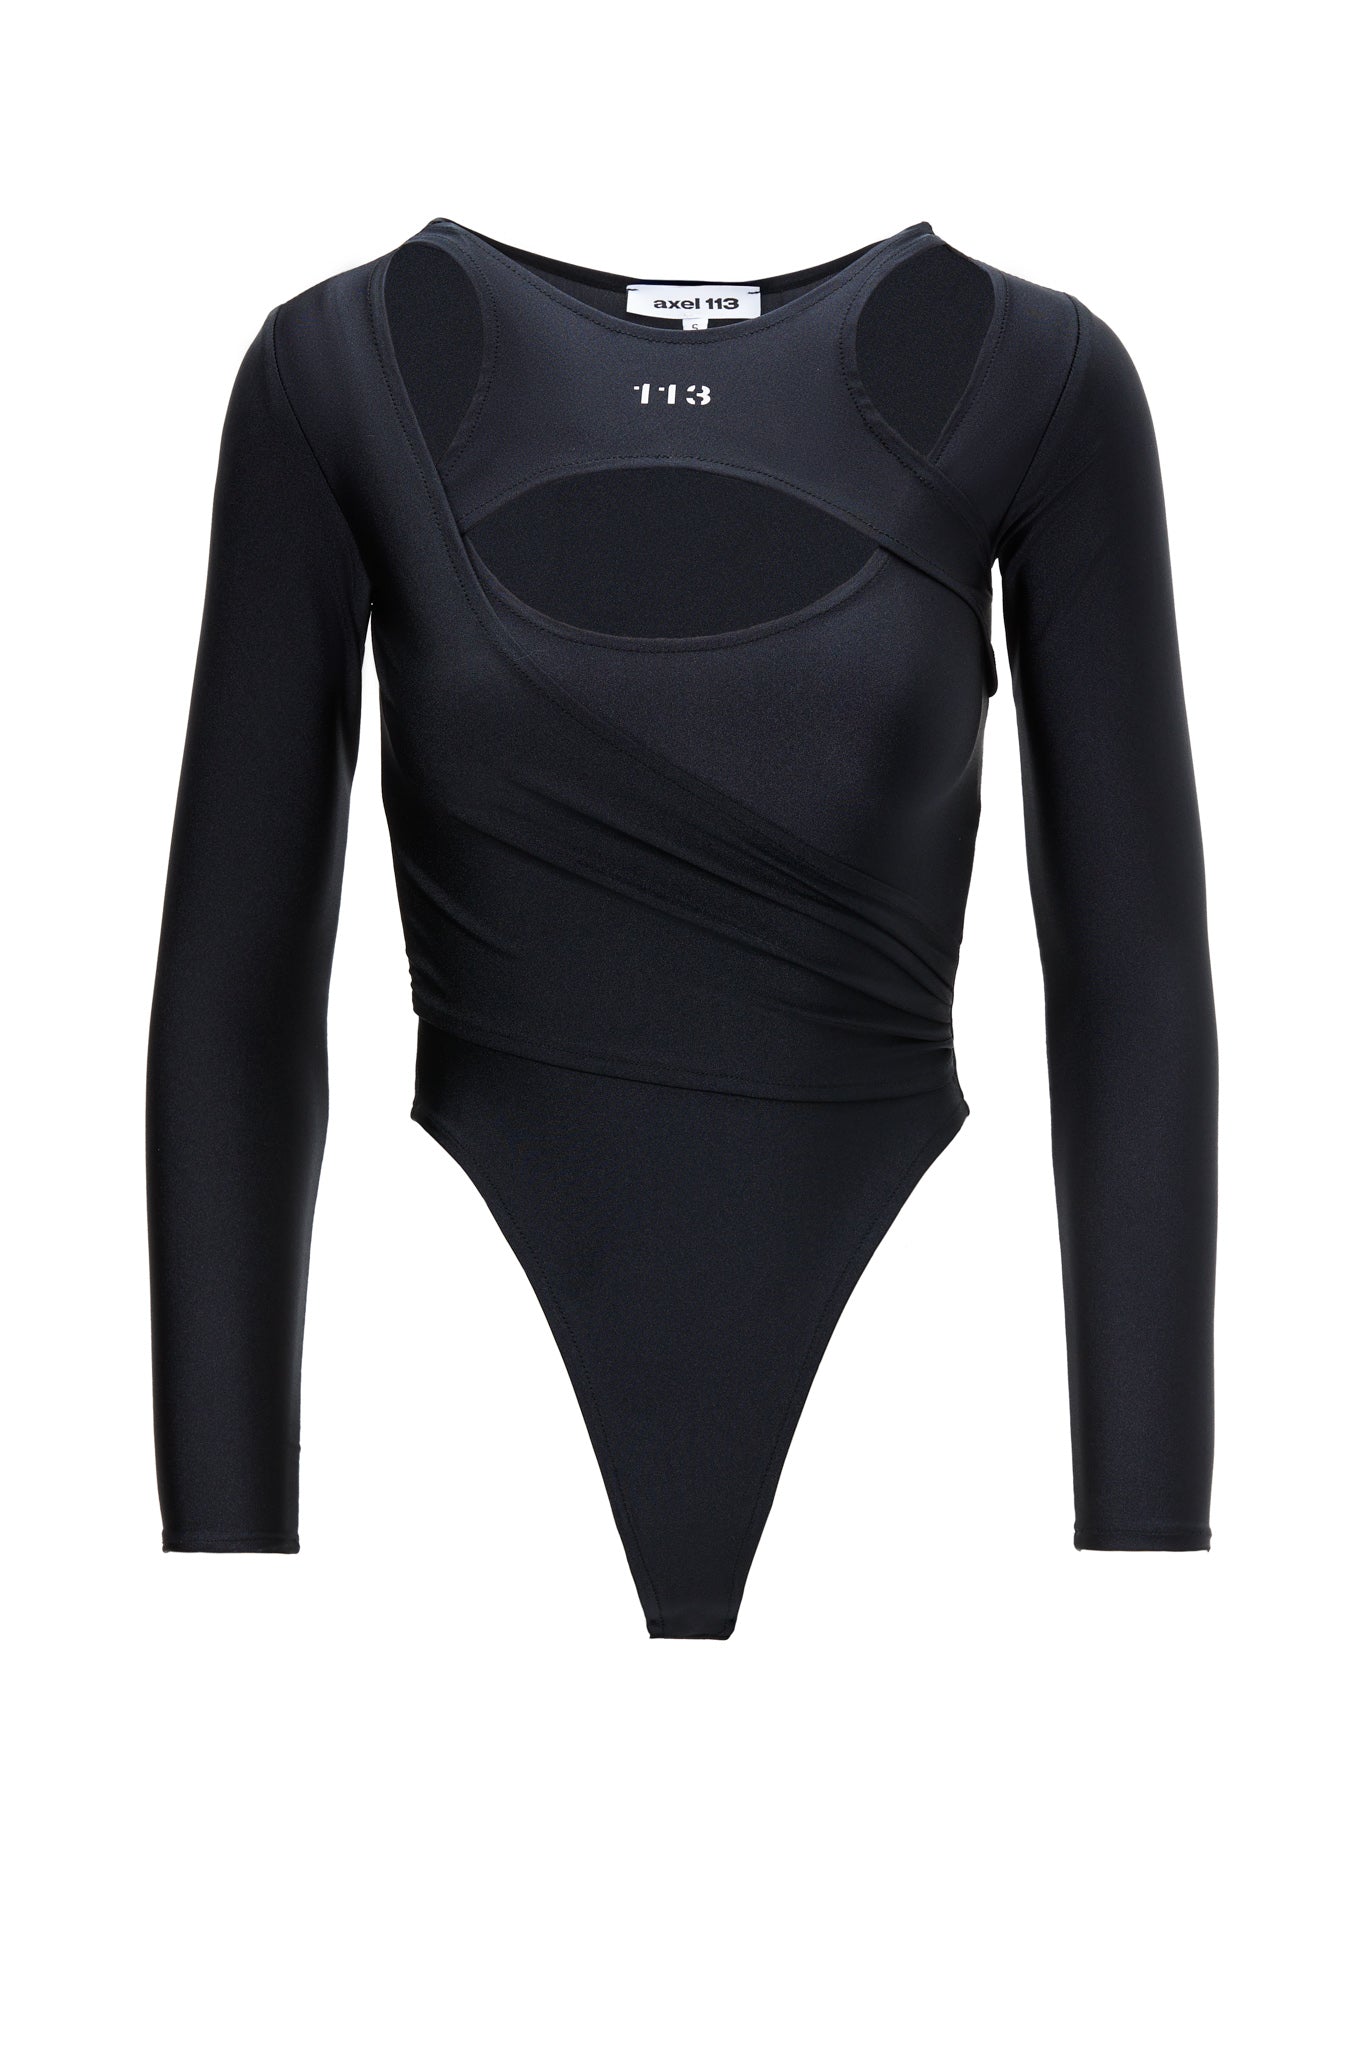 Auden Bodysuit Black - $20 New With Tags - From Korie